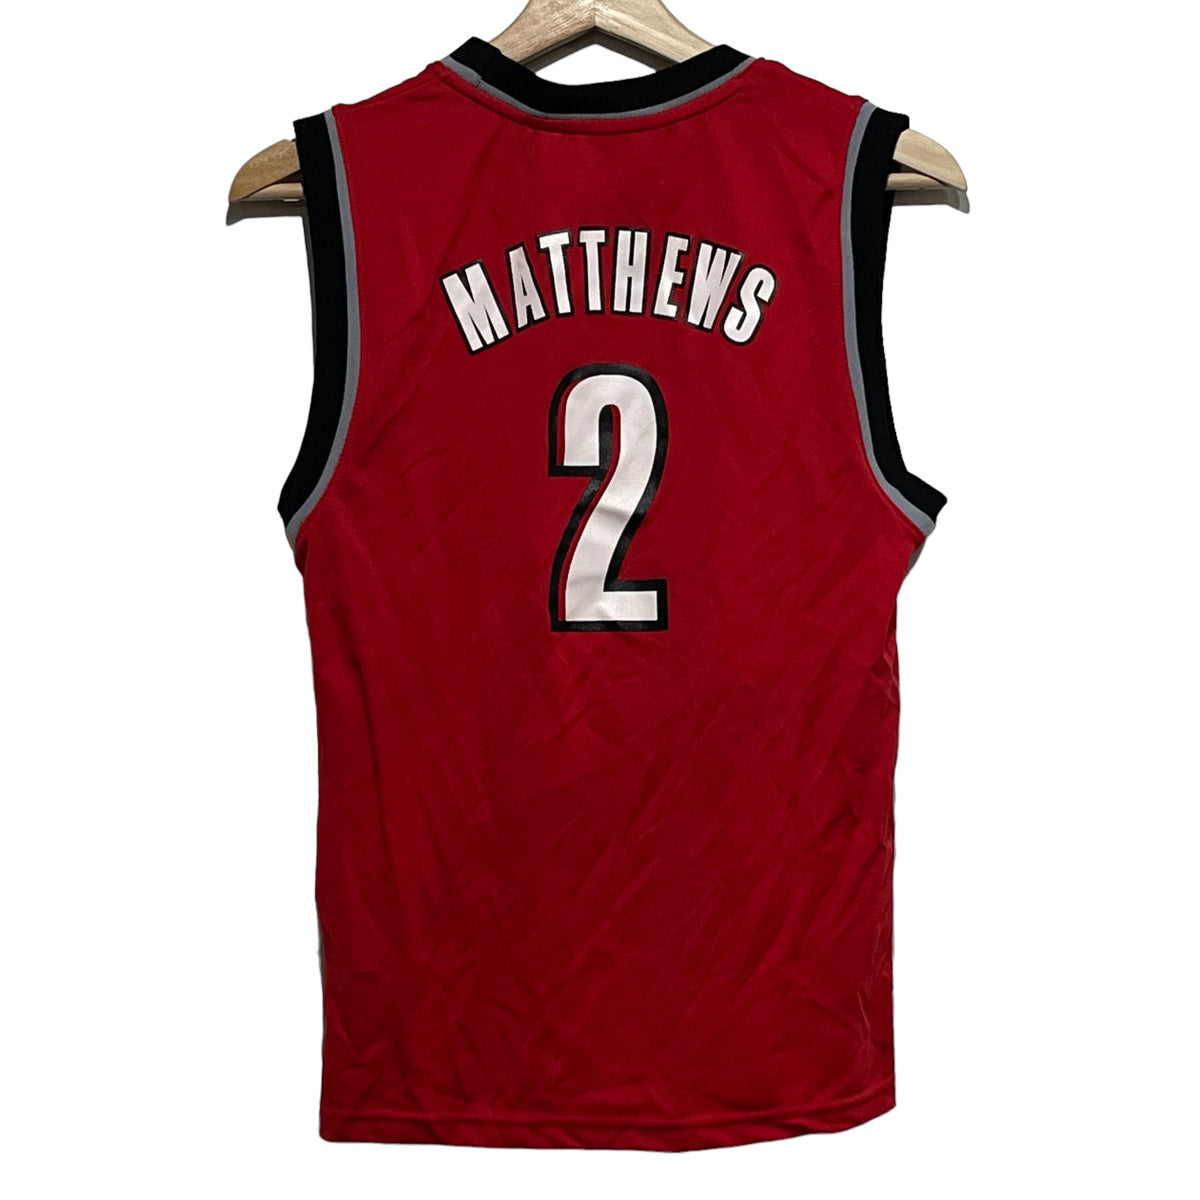 wesley matthews jersey products for sale